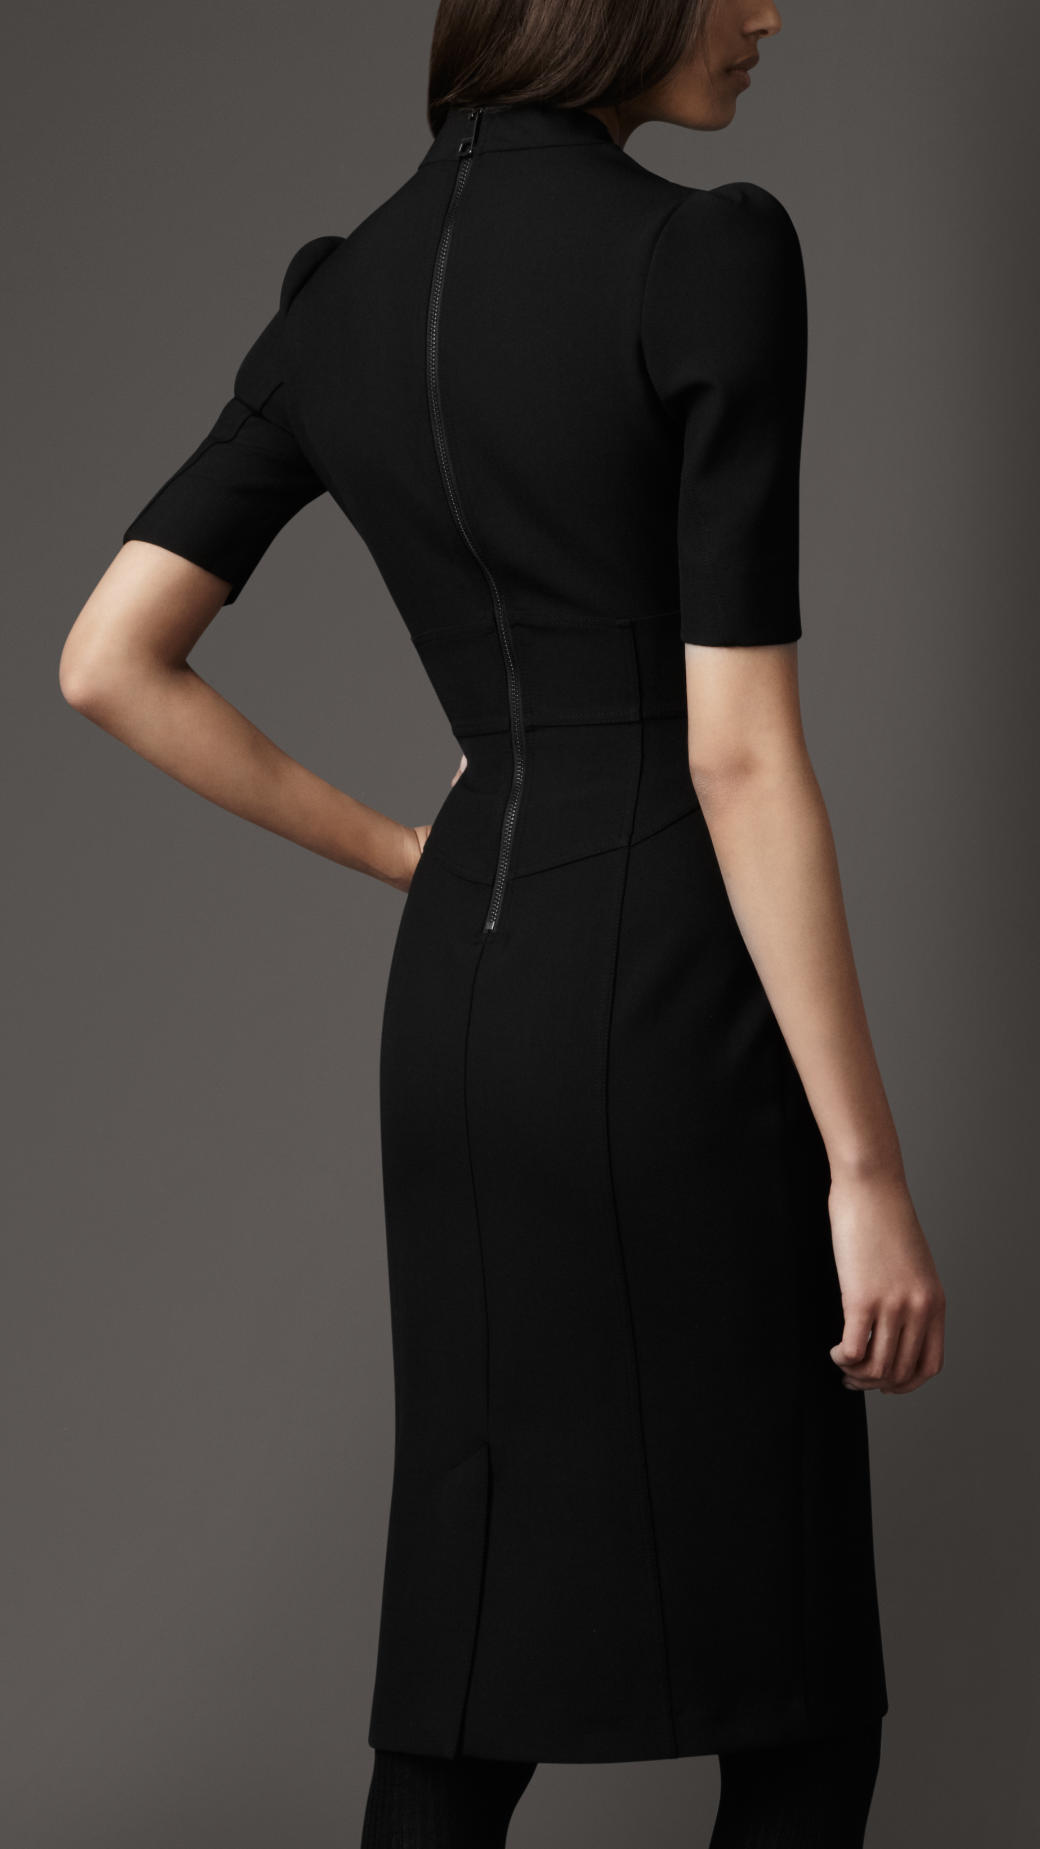 Lyst - Burberry Structured Pencil Dress in Black